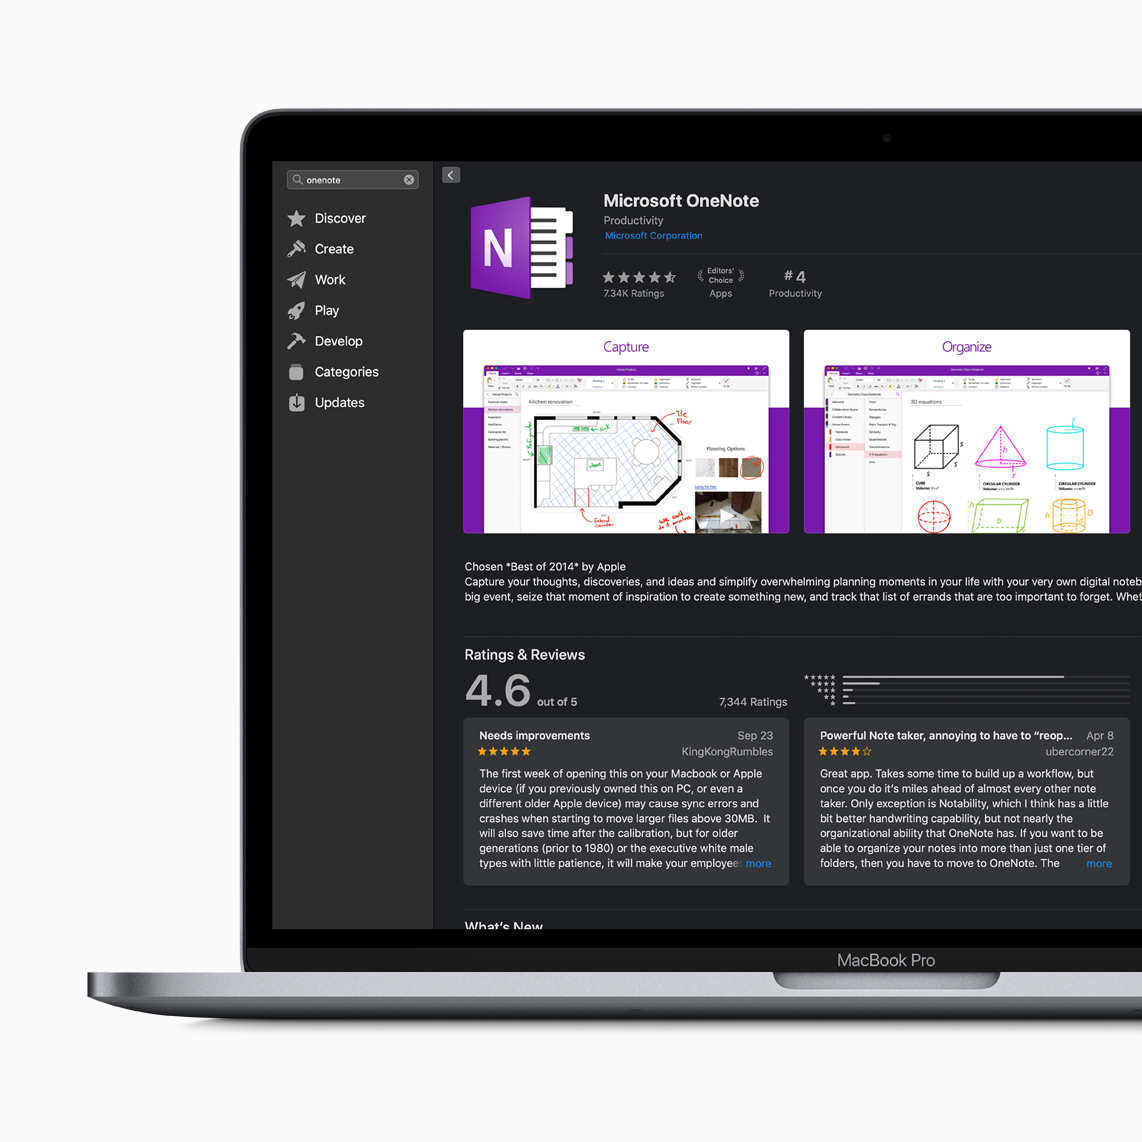 office 365 for mac one time purchase